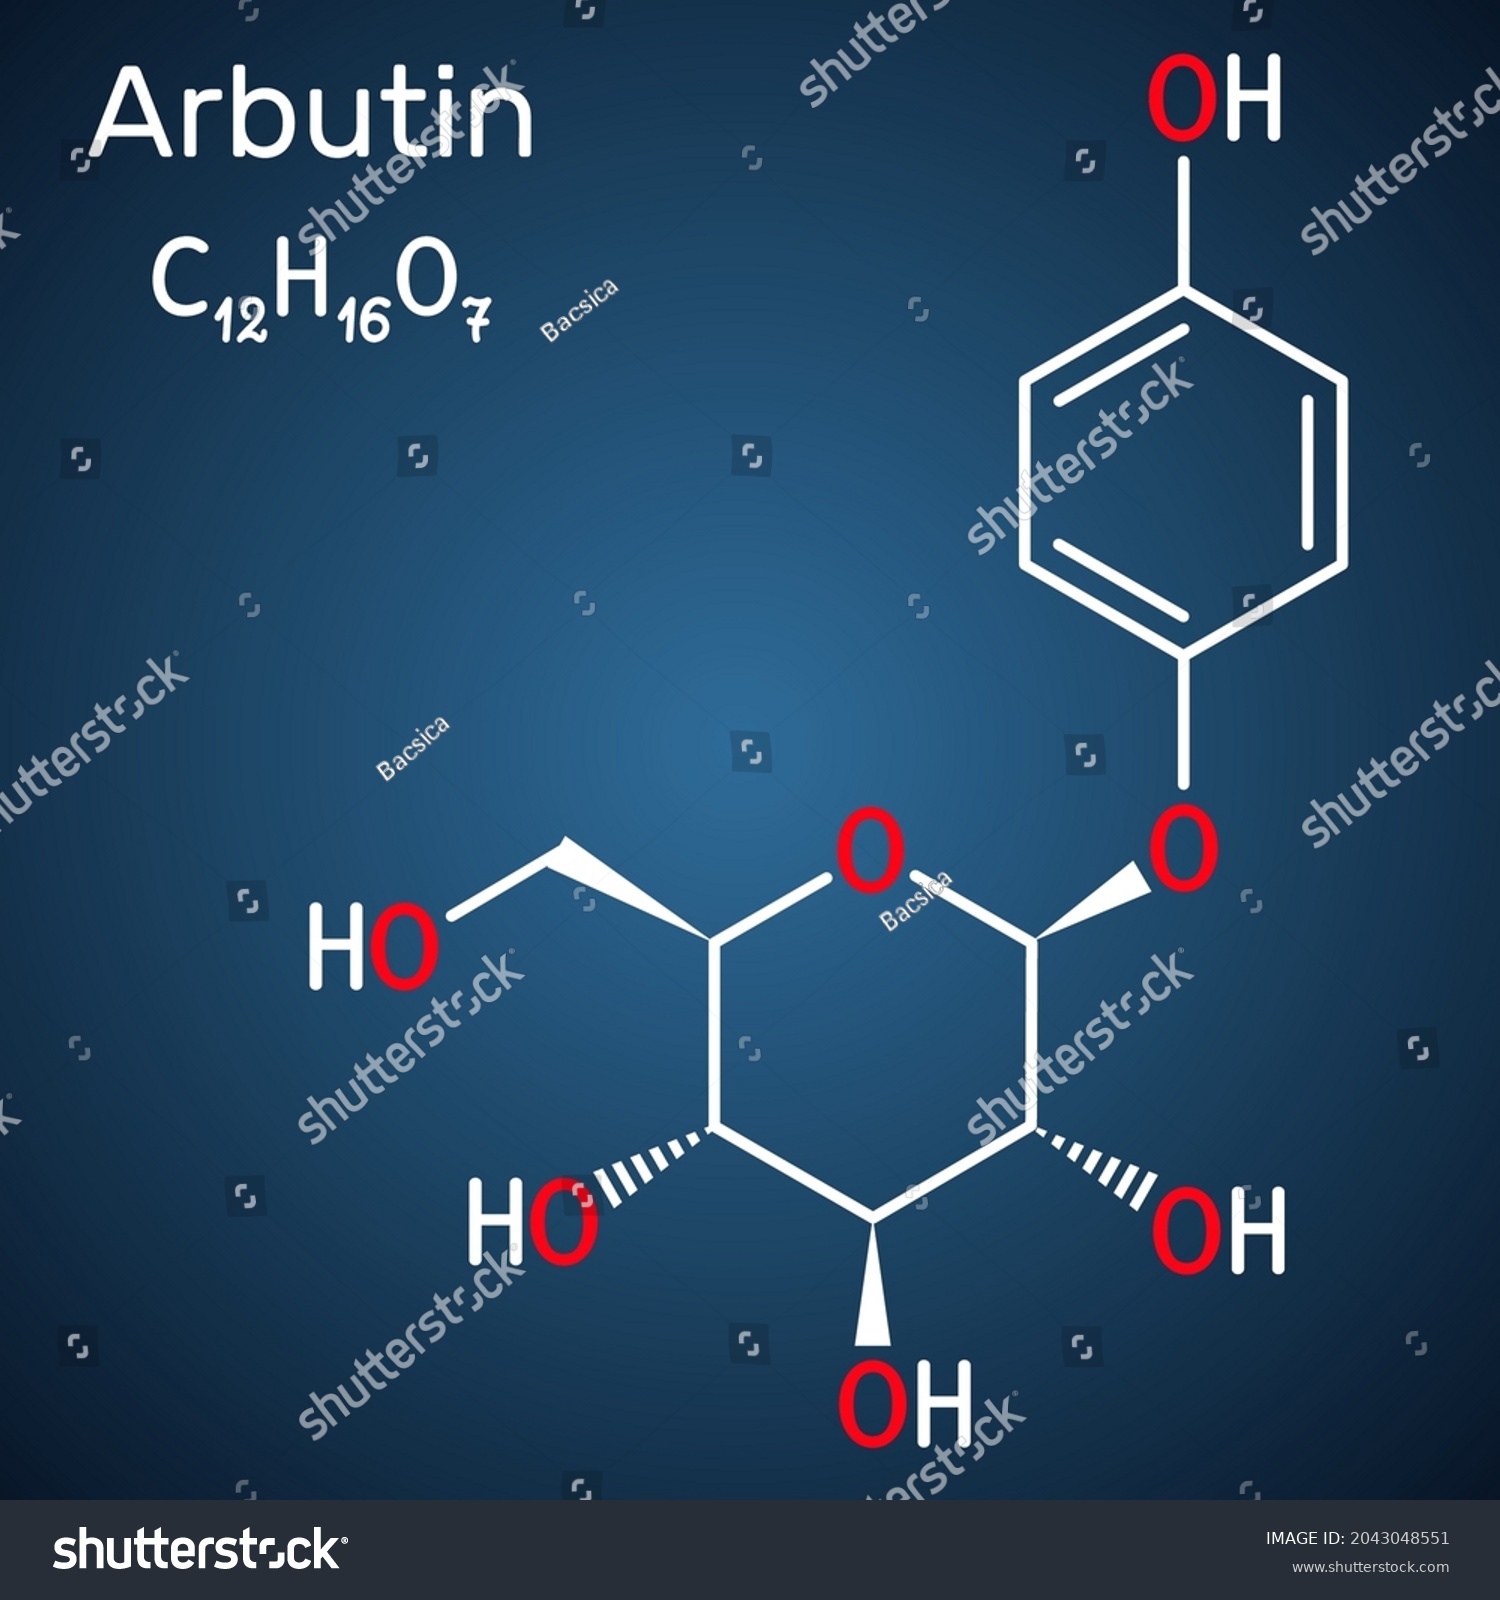 SVG of Arbutin, ursin, arbutoside, glycoside molecule. It is found in plants, preparations from them are used in medicine for diseases of bladder as antiseptic. Structural formula, dark blue background svg